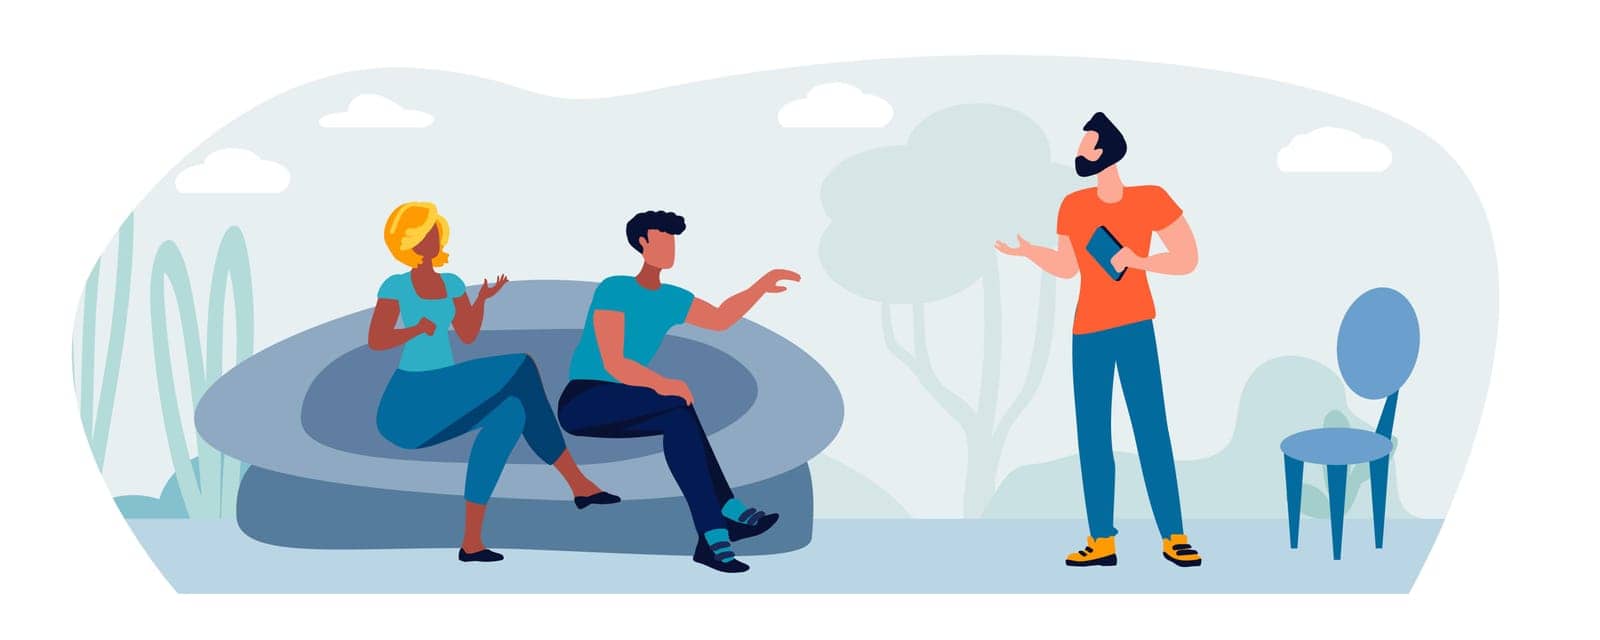 People talking against the backdrop of nature. Discussion. Friends chatting. Employee dialogues. Informal communication concept. Vector illustration